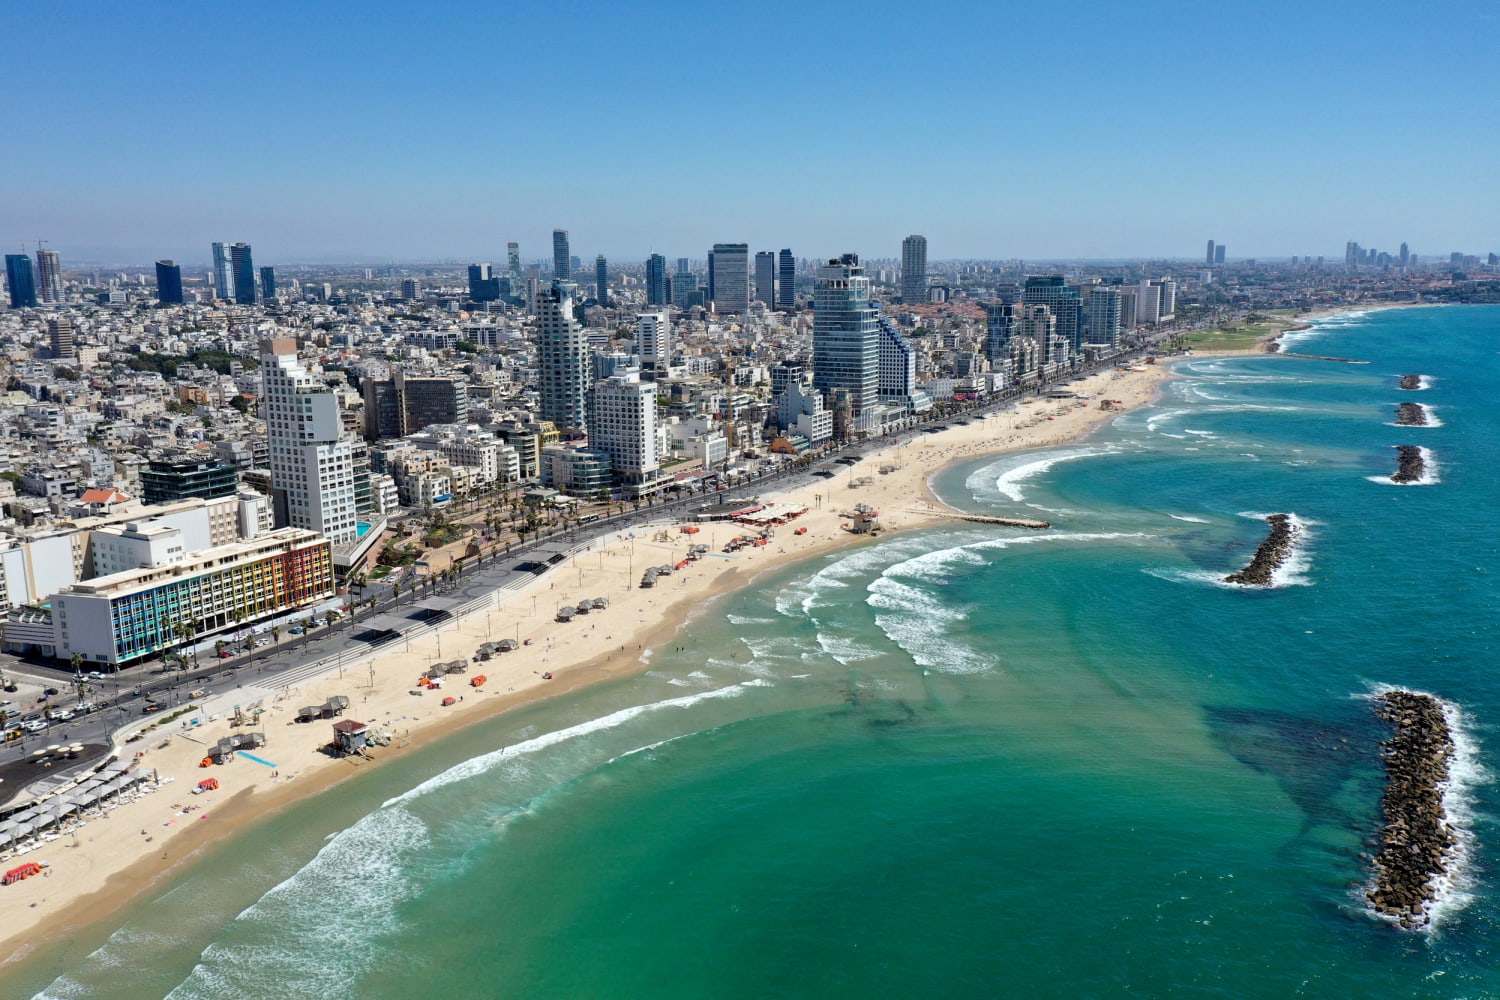 The world's most expensive city is now Tel Aviv, Israel